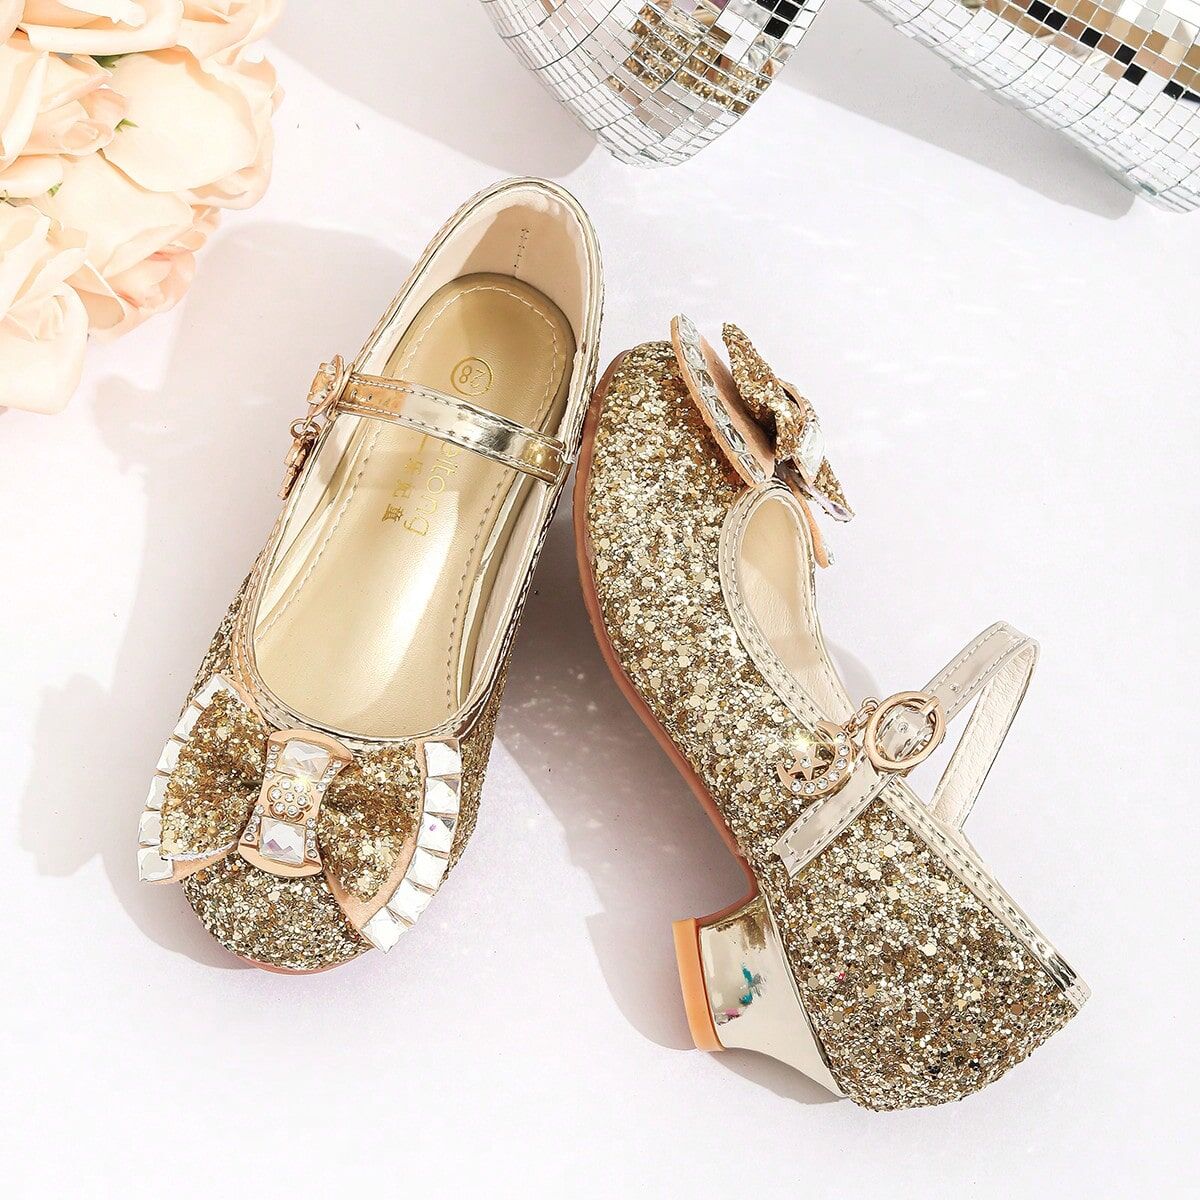 SHEIN Children's Princess Mary Jane Flat Shoes With Shiny Bow Decoration For Girls Gold EUR34,EUR35,EUR36,EUR37,EUR27,EUR28,EUR29,EUR30,EUR31,EUR32,EUR33